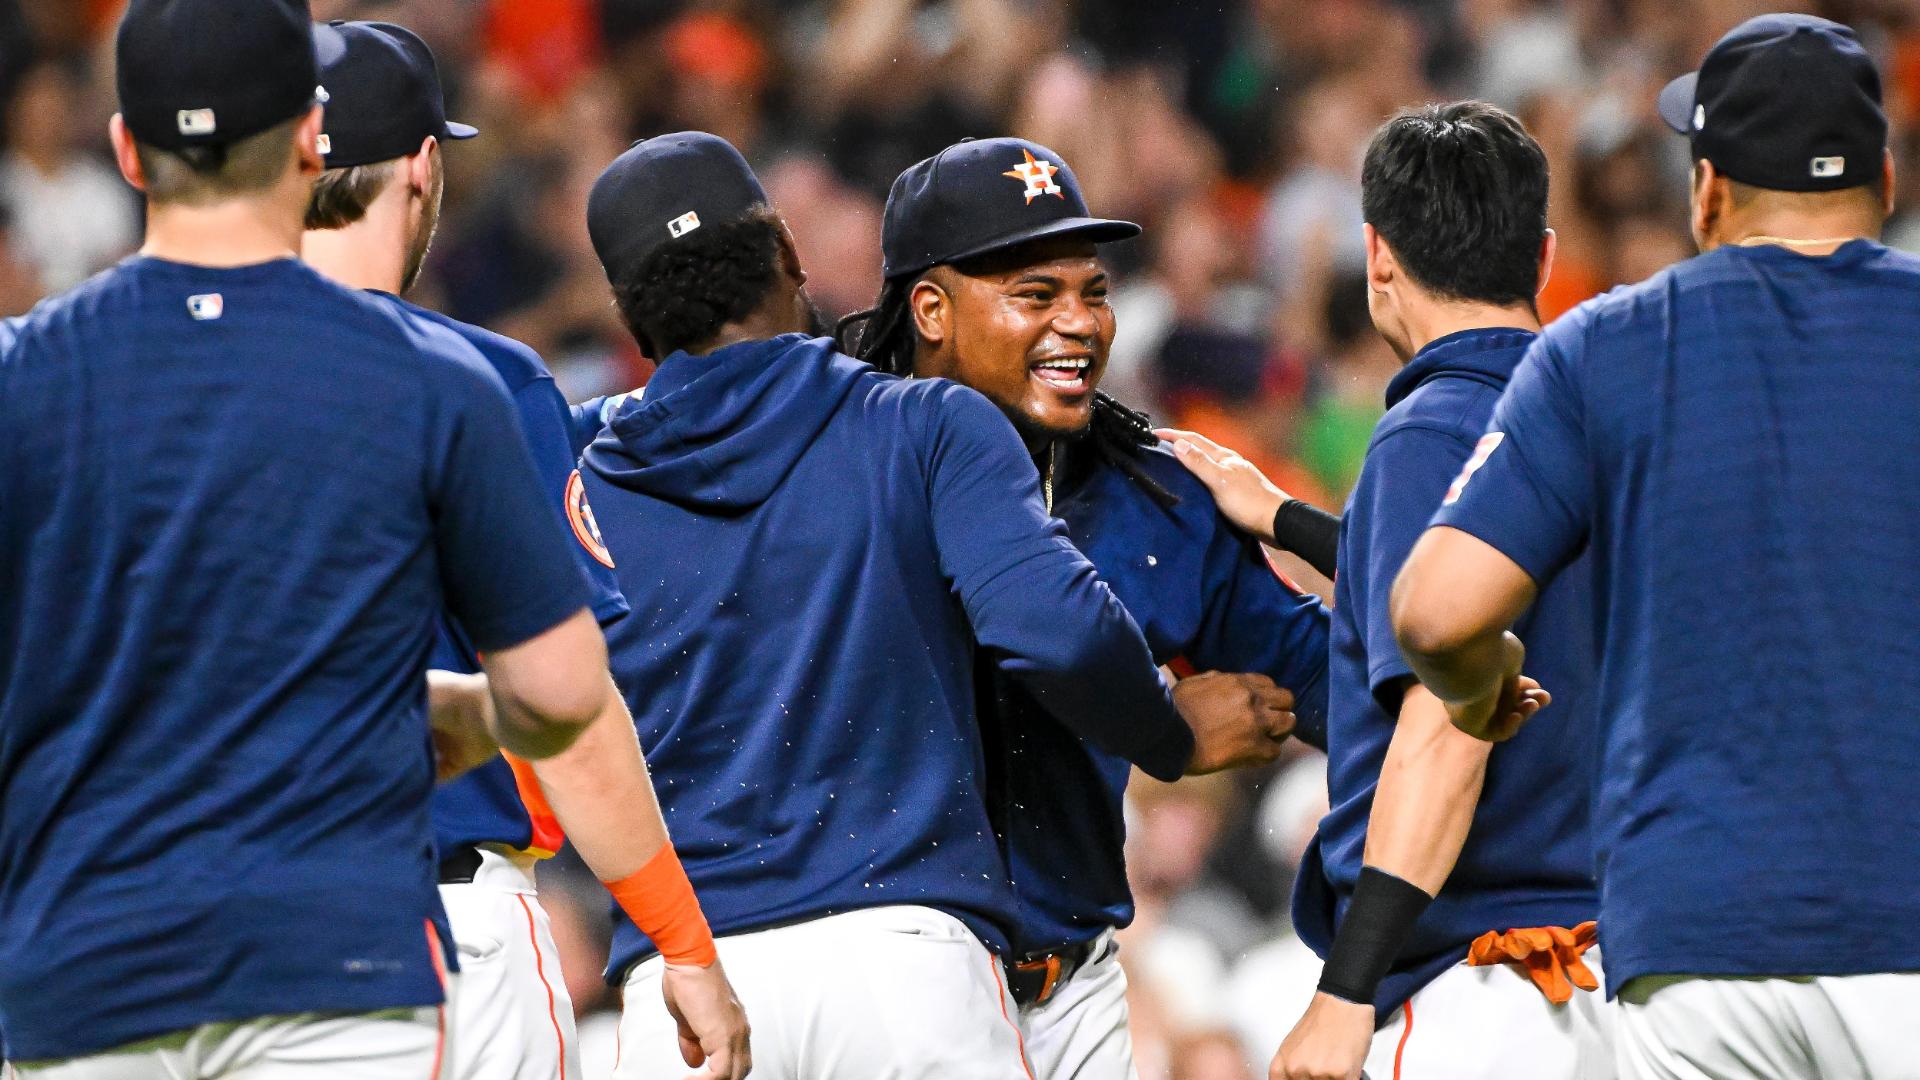 Framber Valdez throws no-hitter as Astros beat Guardians 2-0 - The